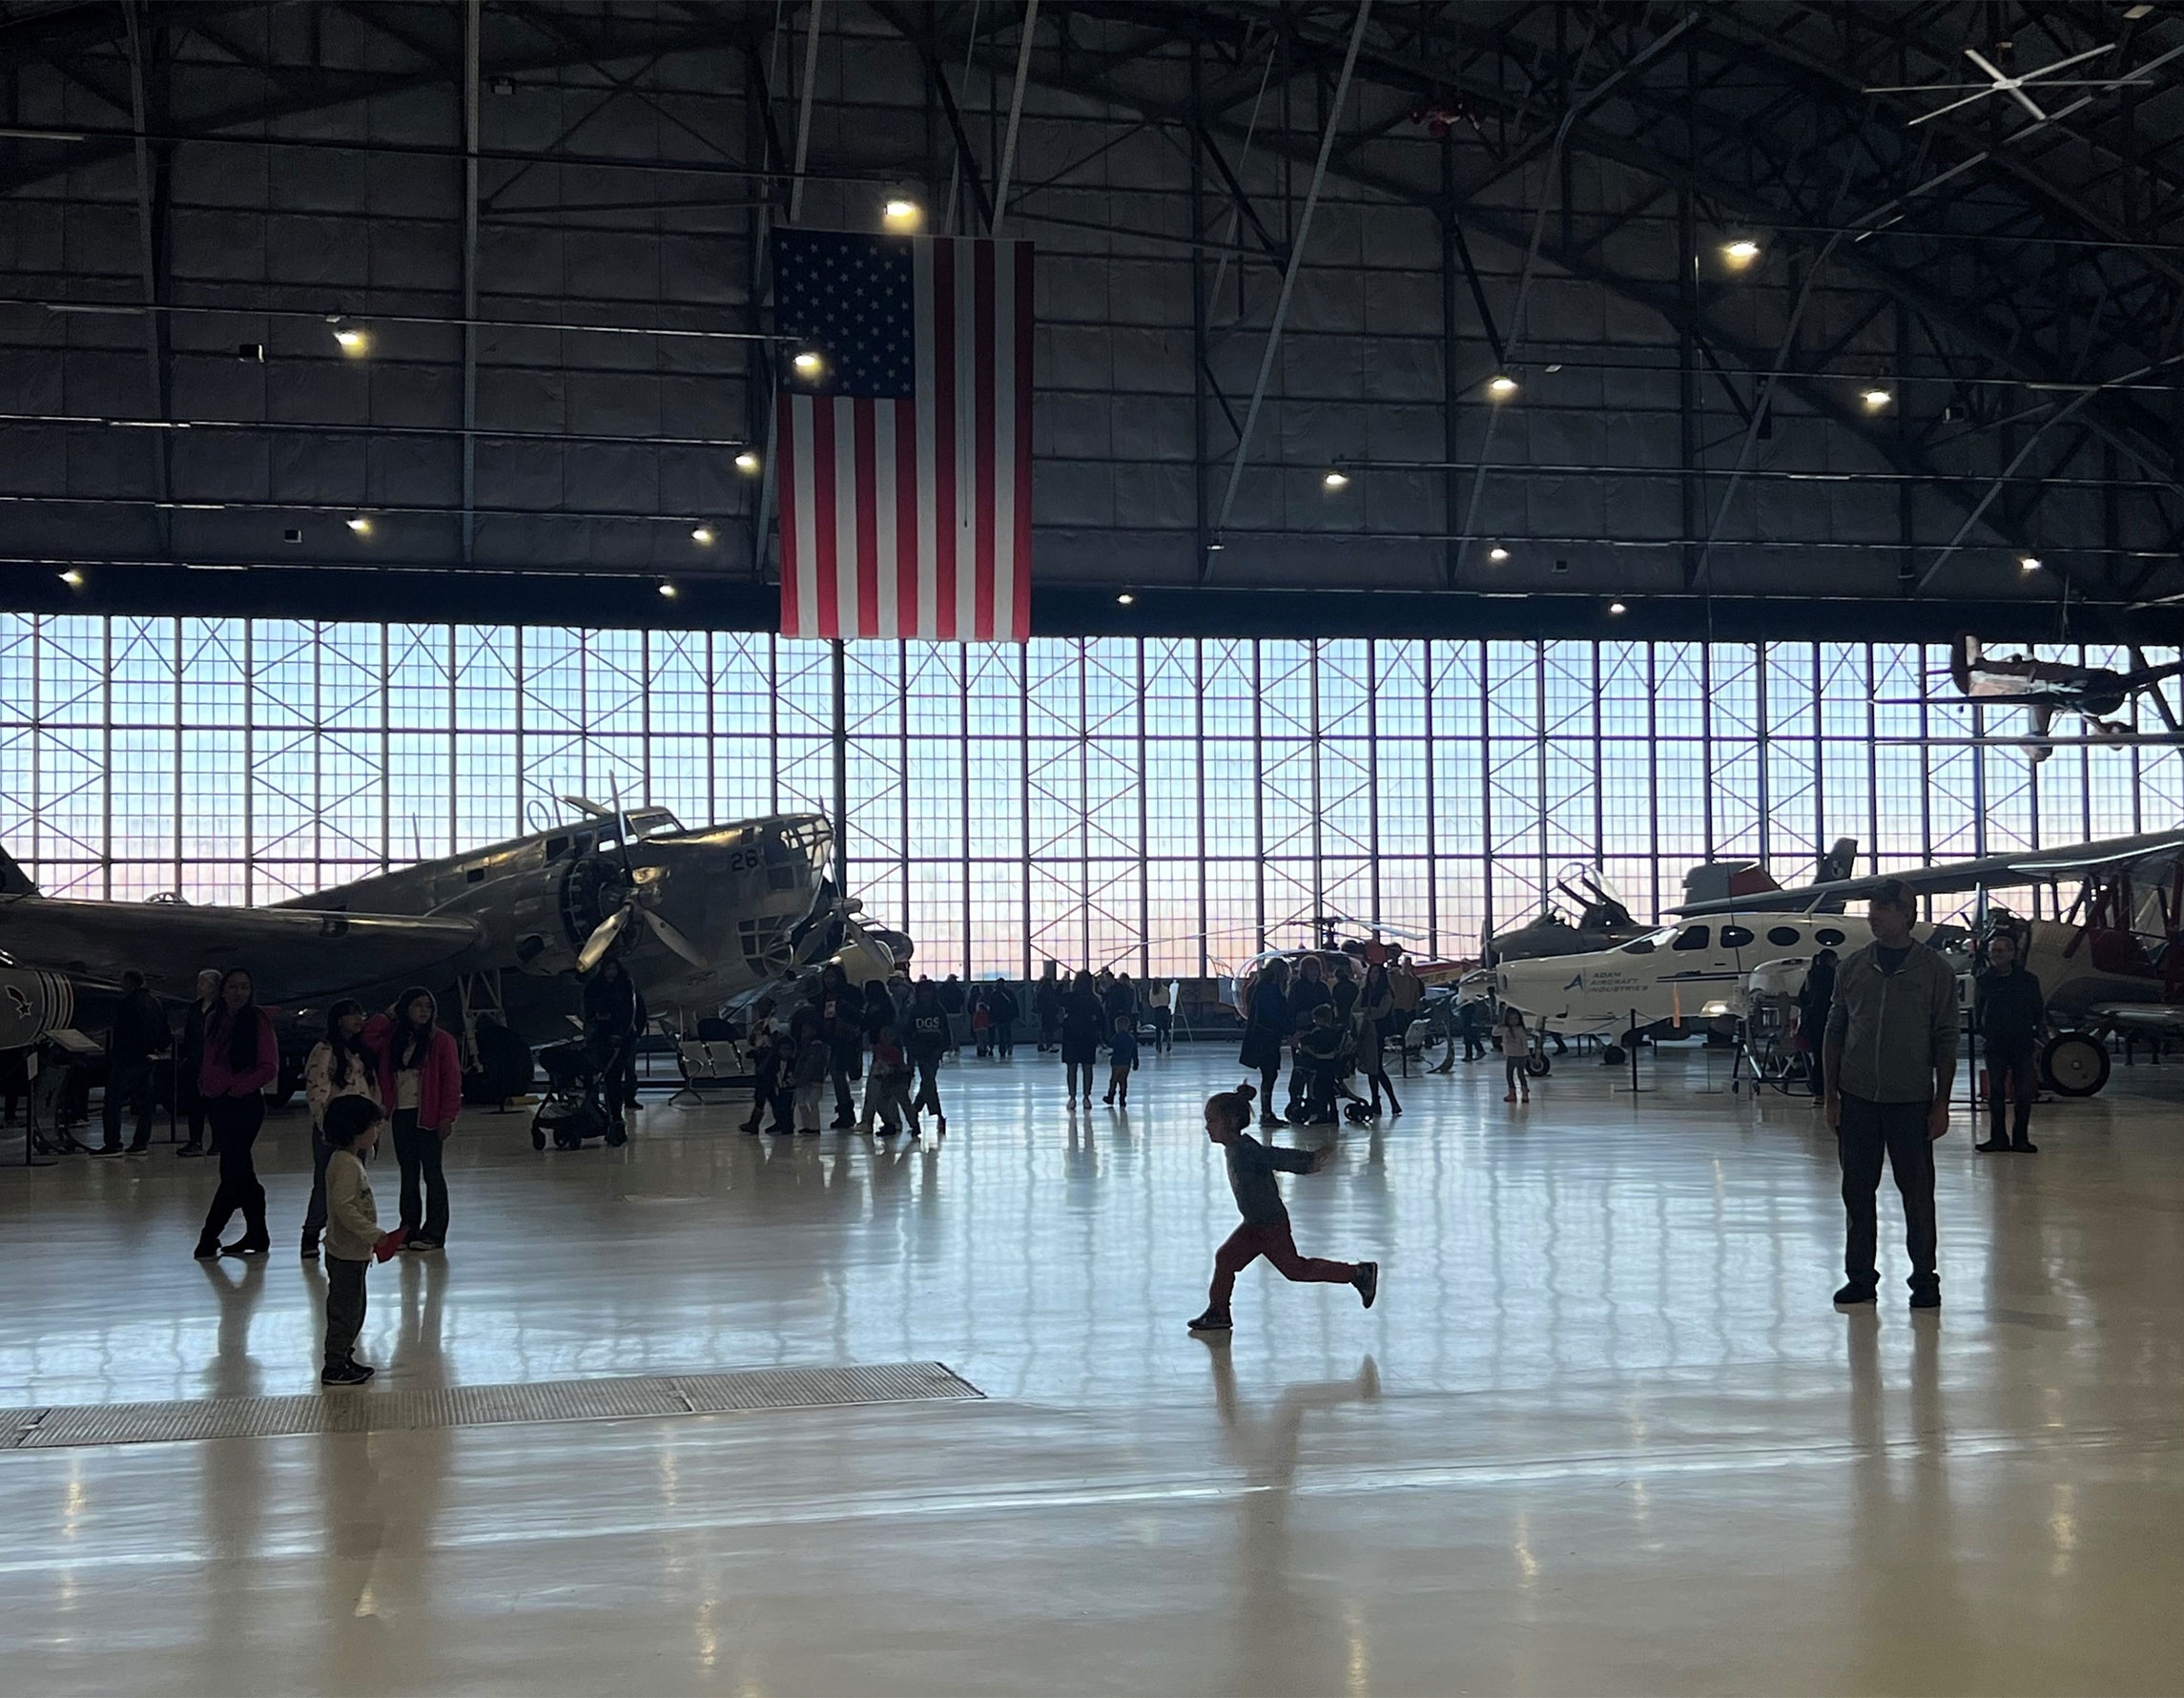 Families in the hangar at the Air & Space Museum